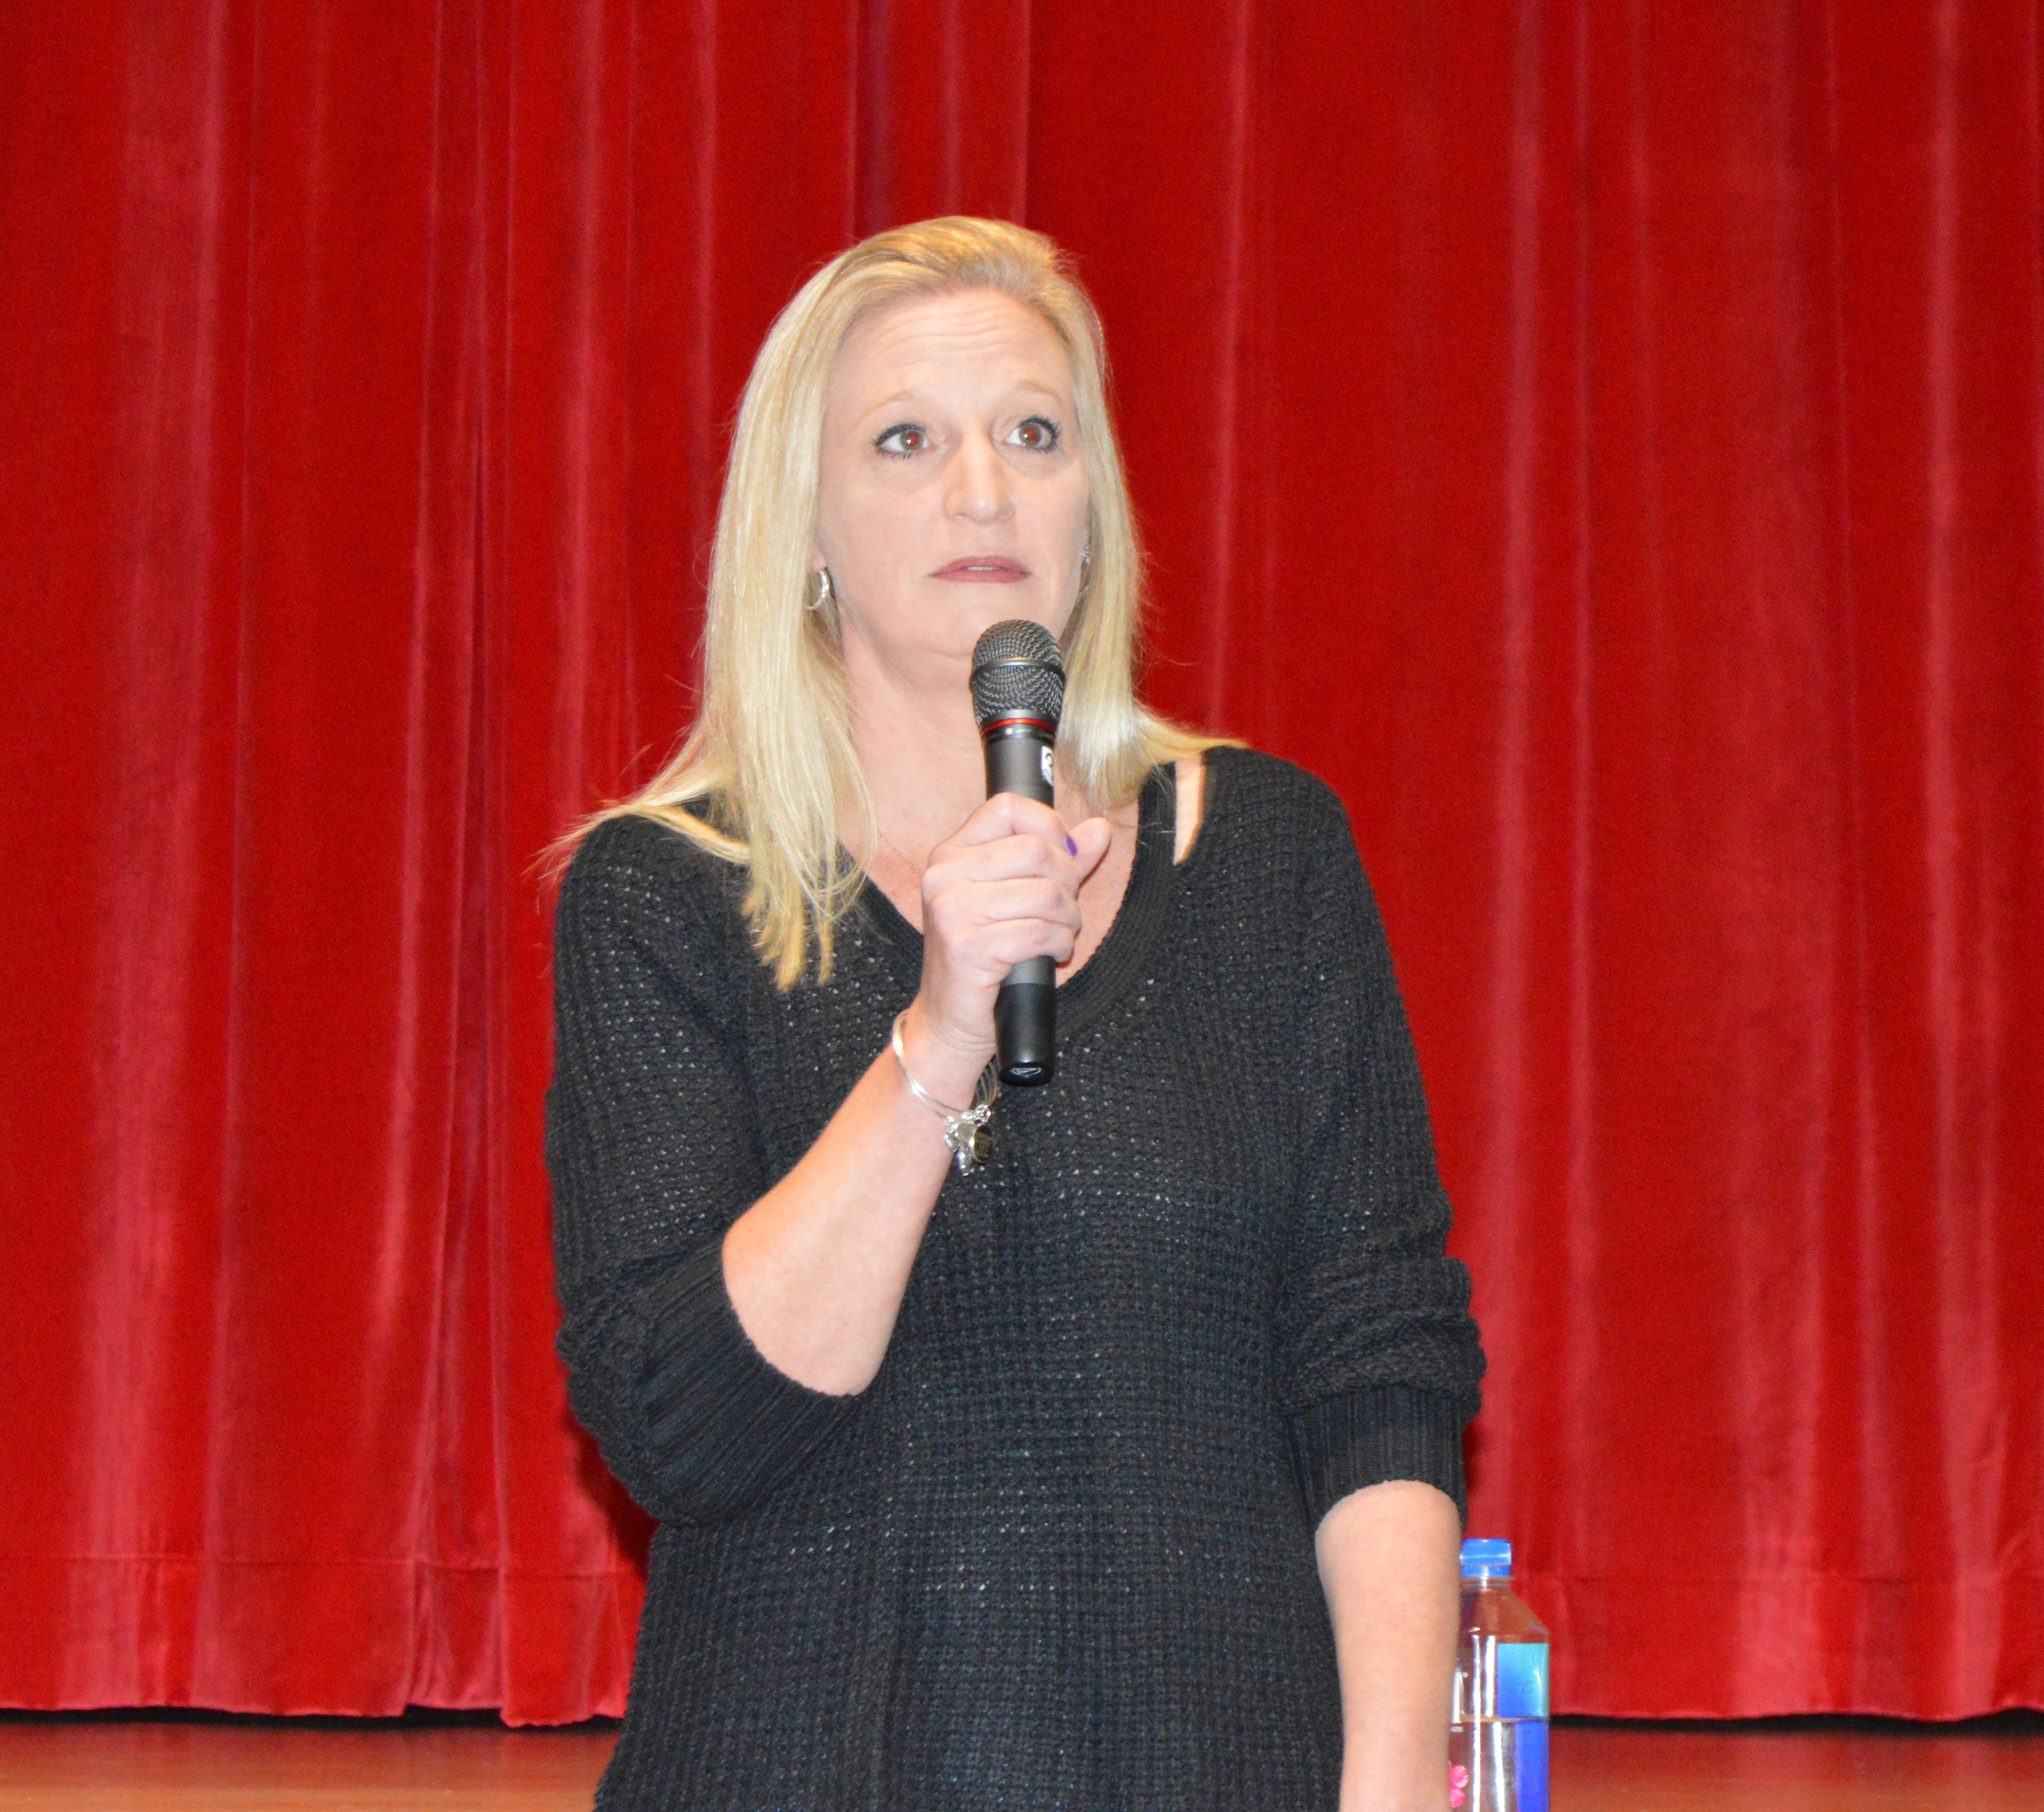 Michelle Schwartzmeir speaks to a crowd of about 40 people at the Clearfield Area Jr./Sr. High School Thursday. When her daughter Casey died from a drug overdose, Schwartzmier honored her daughter's wishes to write an obituary speaking plainly and honestly about Casey's struggle with drugs. The obituary went viral and Schwartzmeir has spoken to countless addicts from around the world about getting help and continuing to fight to stay sober. Schwartzmeir was asked to share her story as part of the school district's continuing program to raise awareness about drug addiction in the Clearfield Area. (Photo by Kimberly Finnigan)